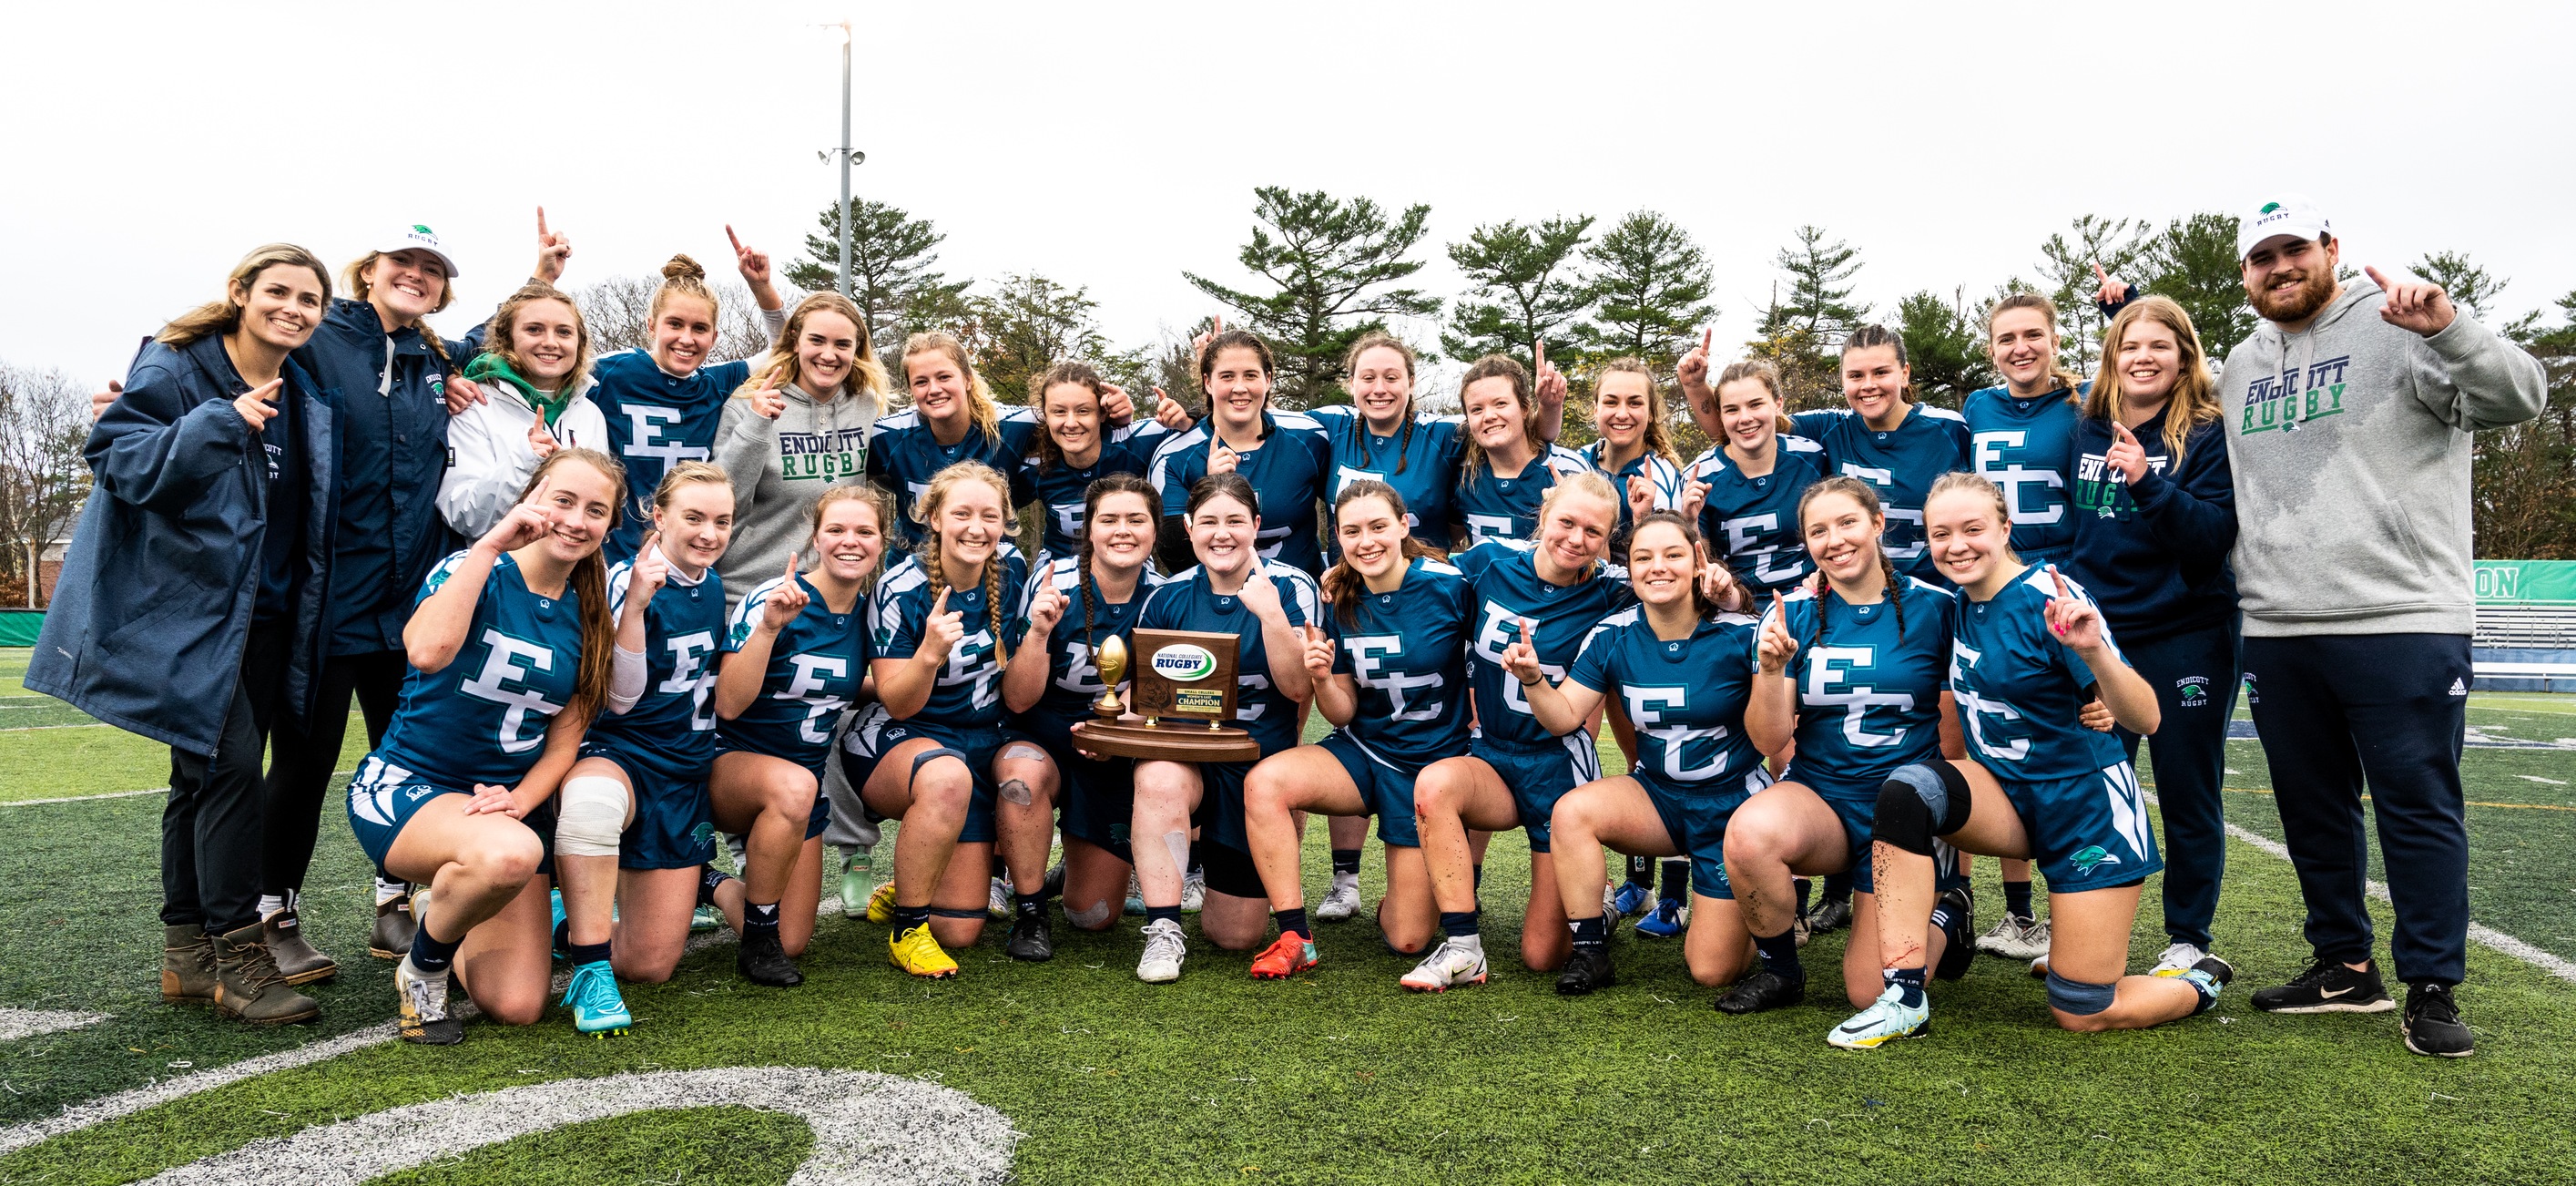 REGIONAL CHAMPS! No. 3 Women’s Rugby Bests No. 1 Cortland For NCR East Regionals Title, 31-27